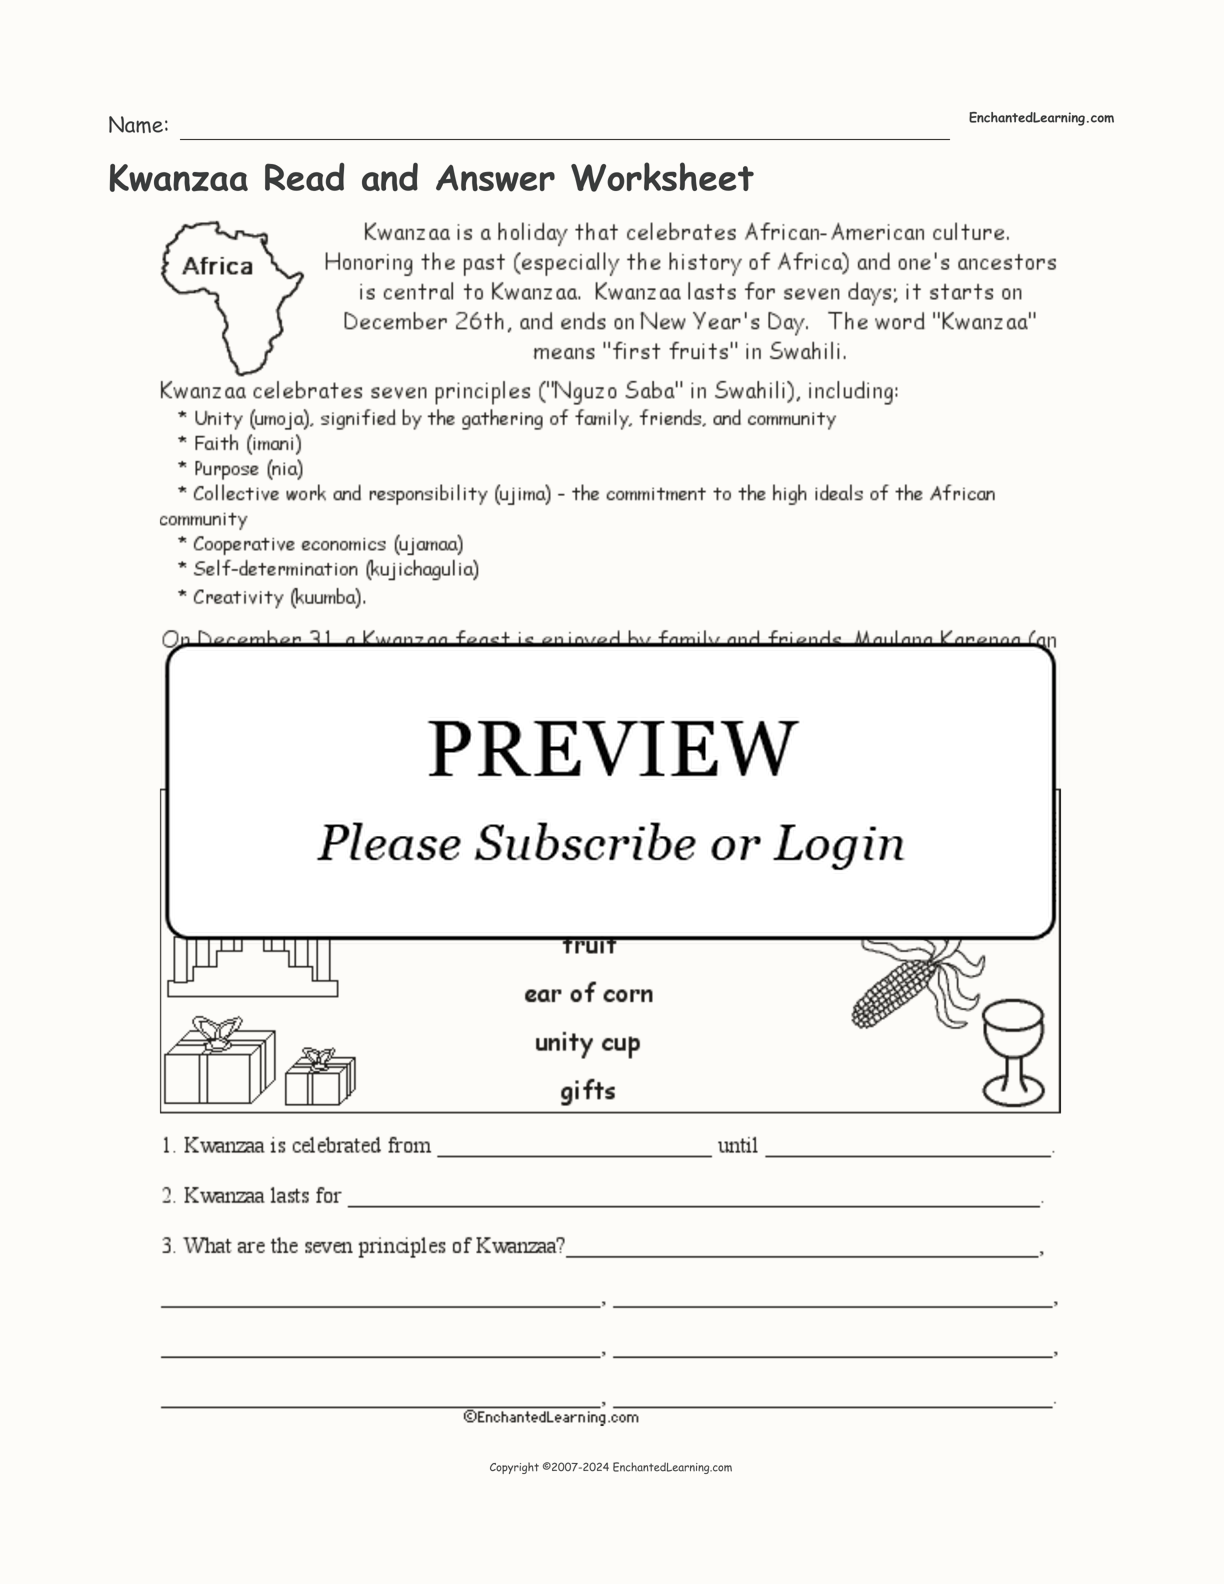 Kwanzaa Read and Answer Worksheet interactive worksheet page 1